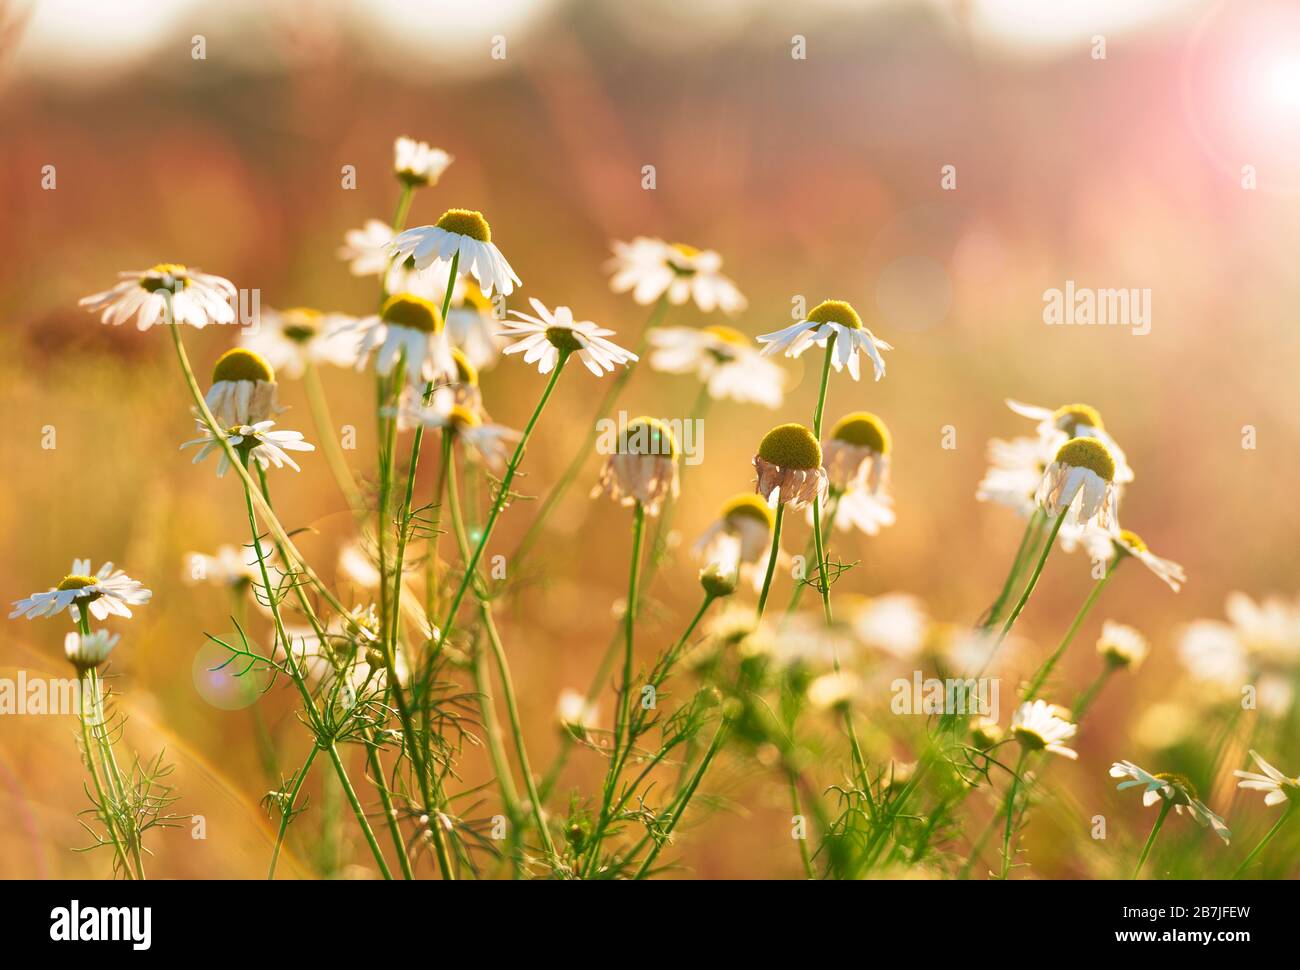 Beautiful daisy flowers in spring with sun flare. Shallow focus, warm colors Stock Photo